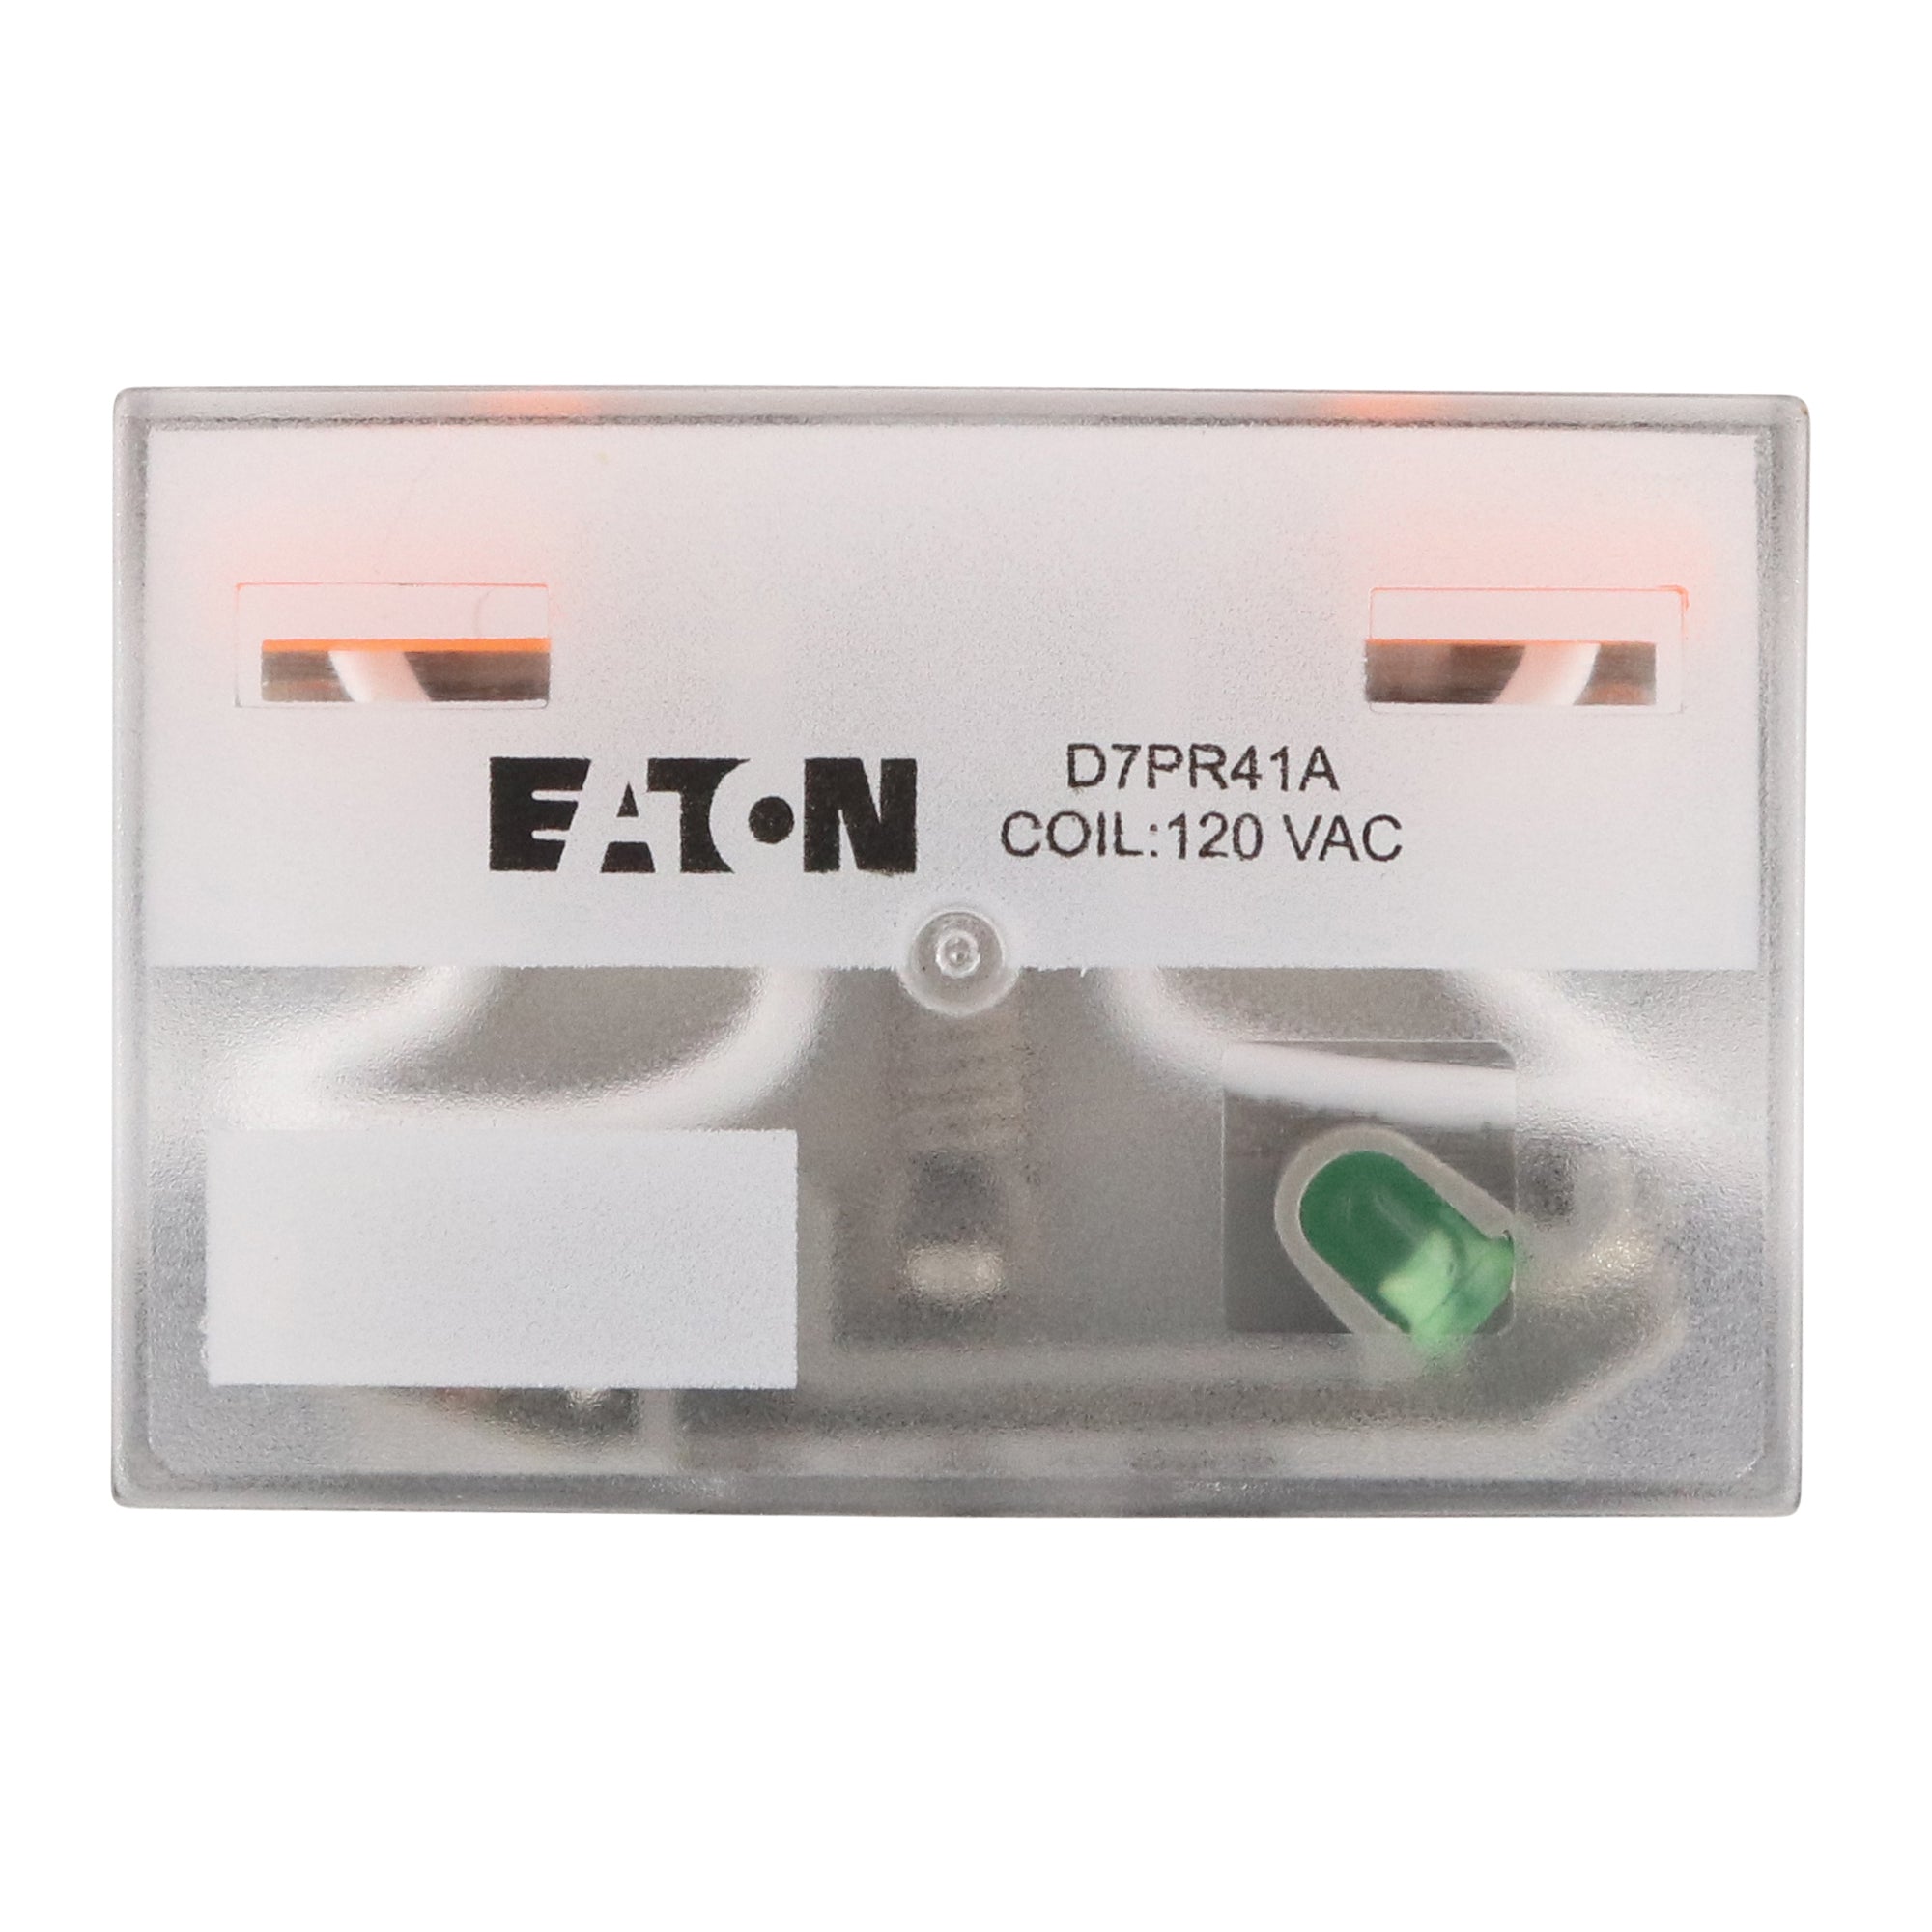 EATON, EATON D7PR41A GENERAL PURPOSE ICE CUBE RELAY, D7, 14-BLADE, 4PDT, 120V COIL